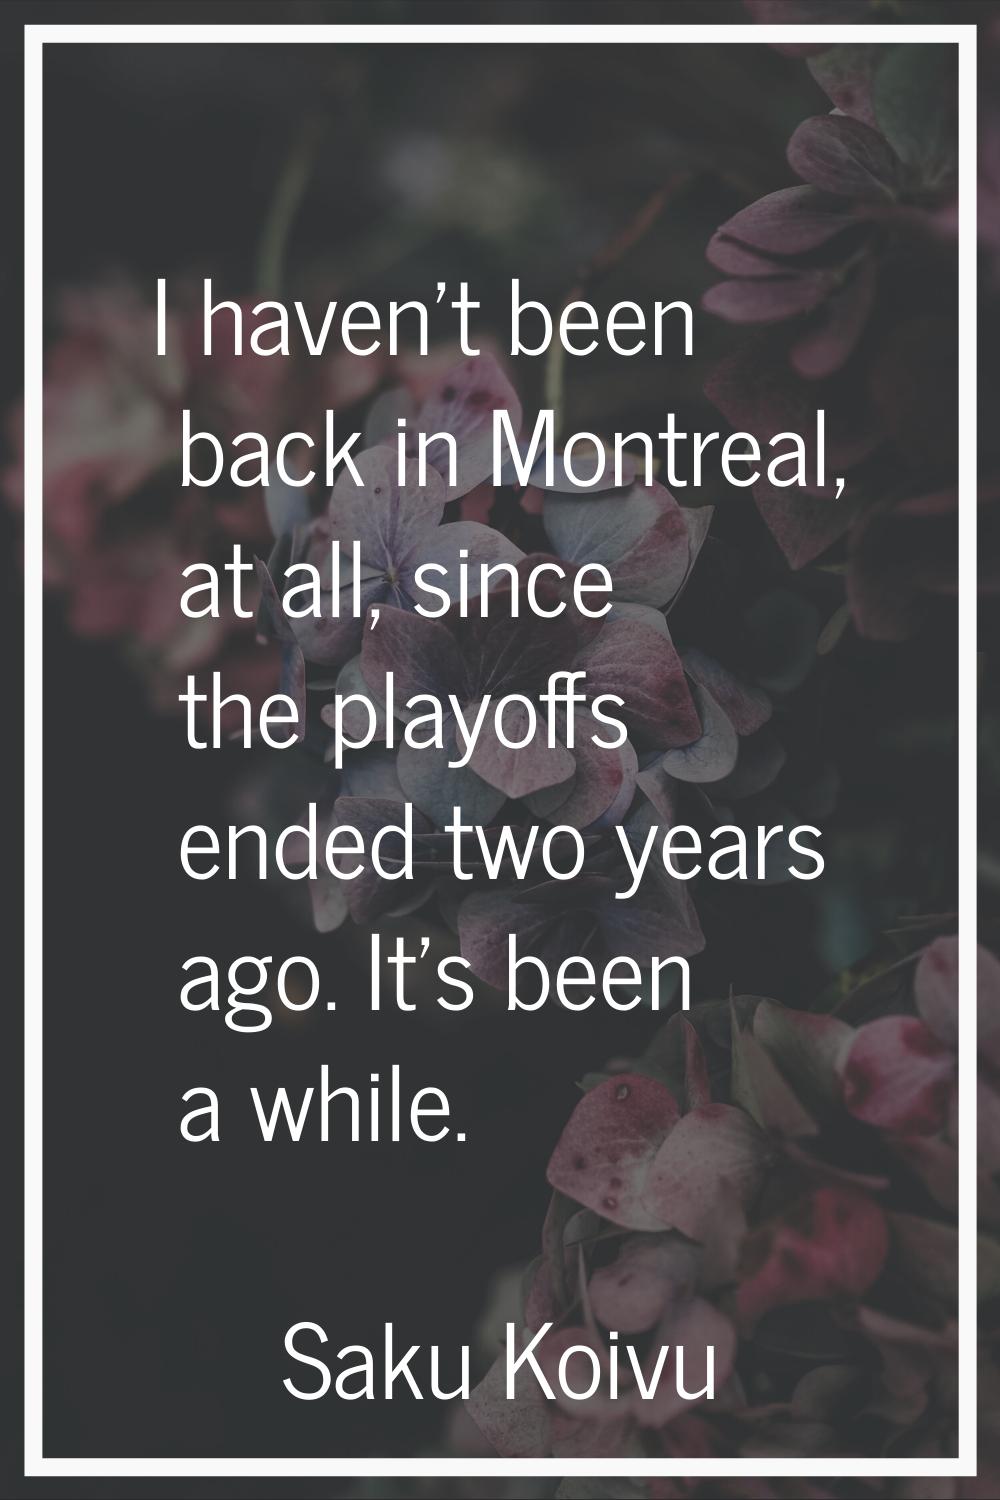 I haven't been back in Montreal, at all, since the playoffs ended two years ago. It's been a while.